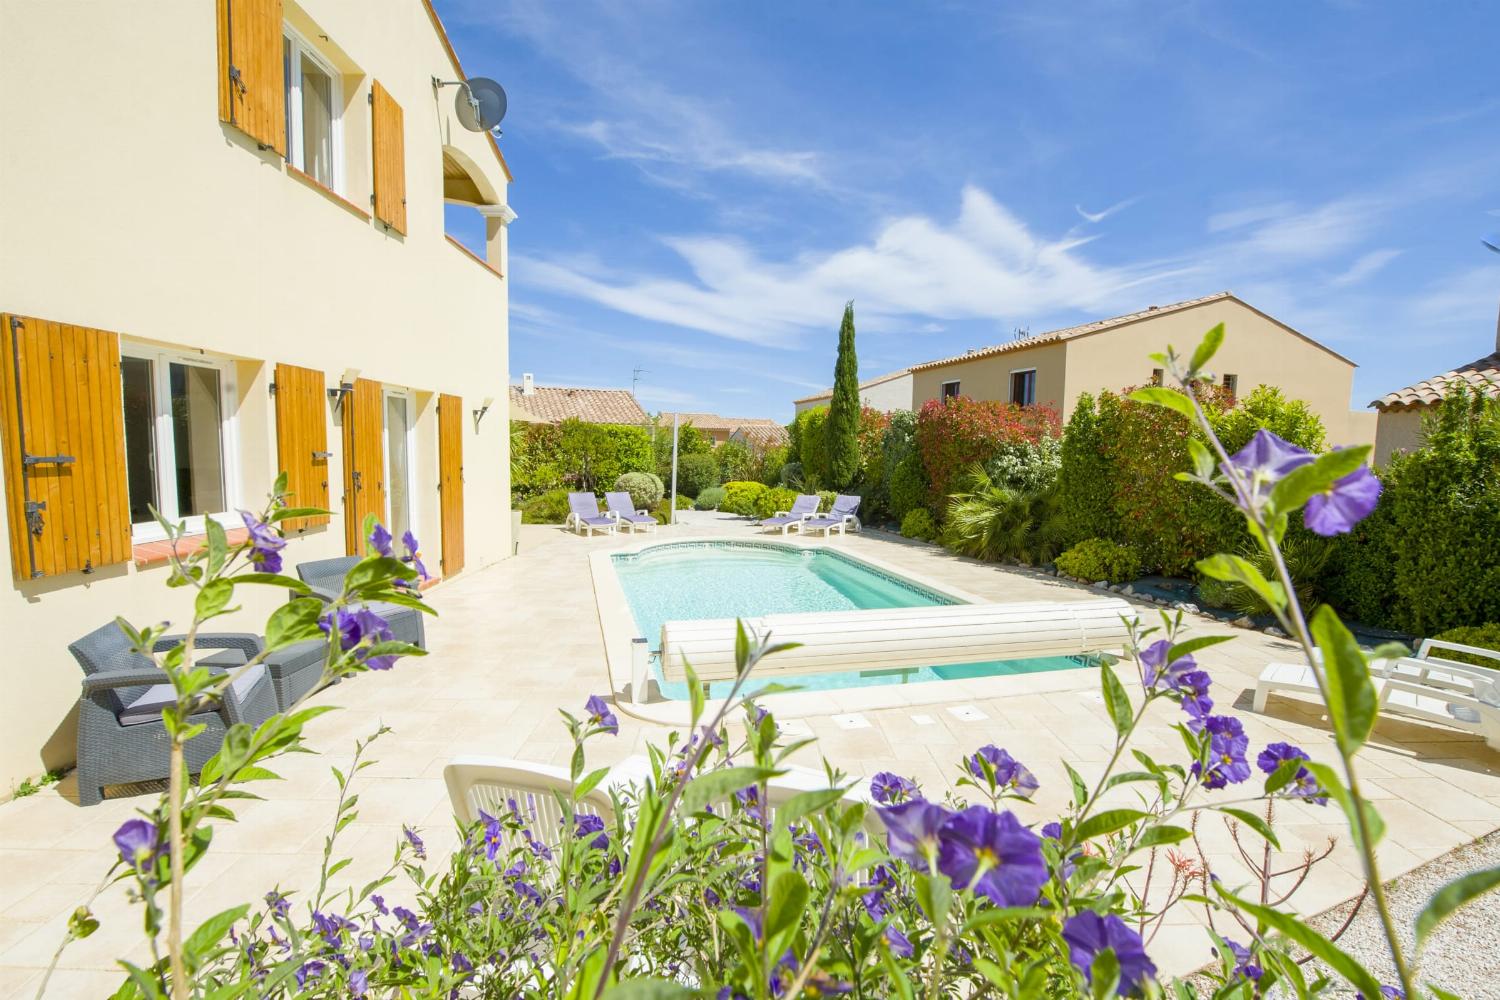 Holiday villa in the South of France with private heated pool